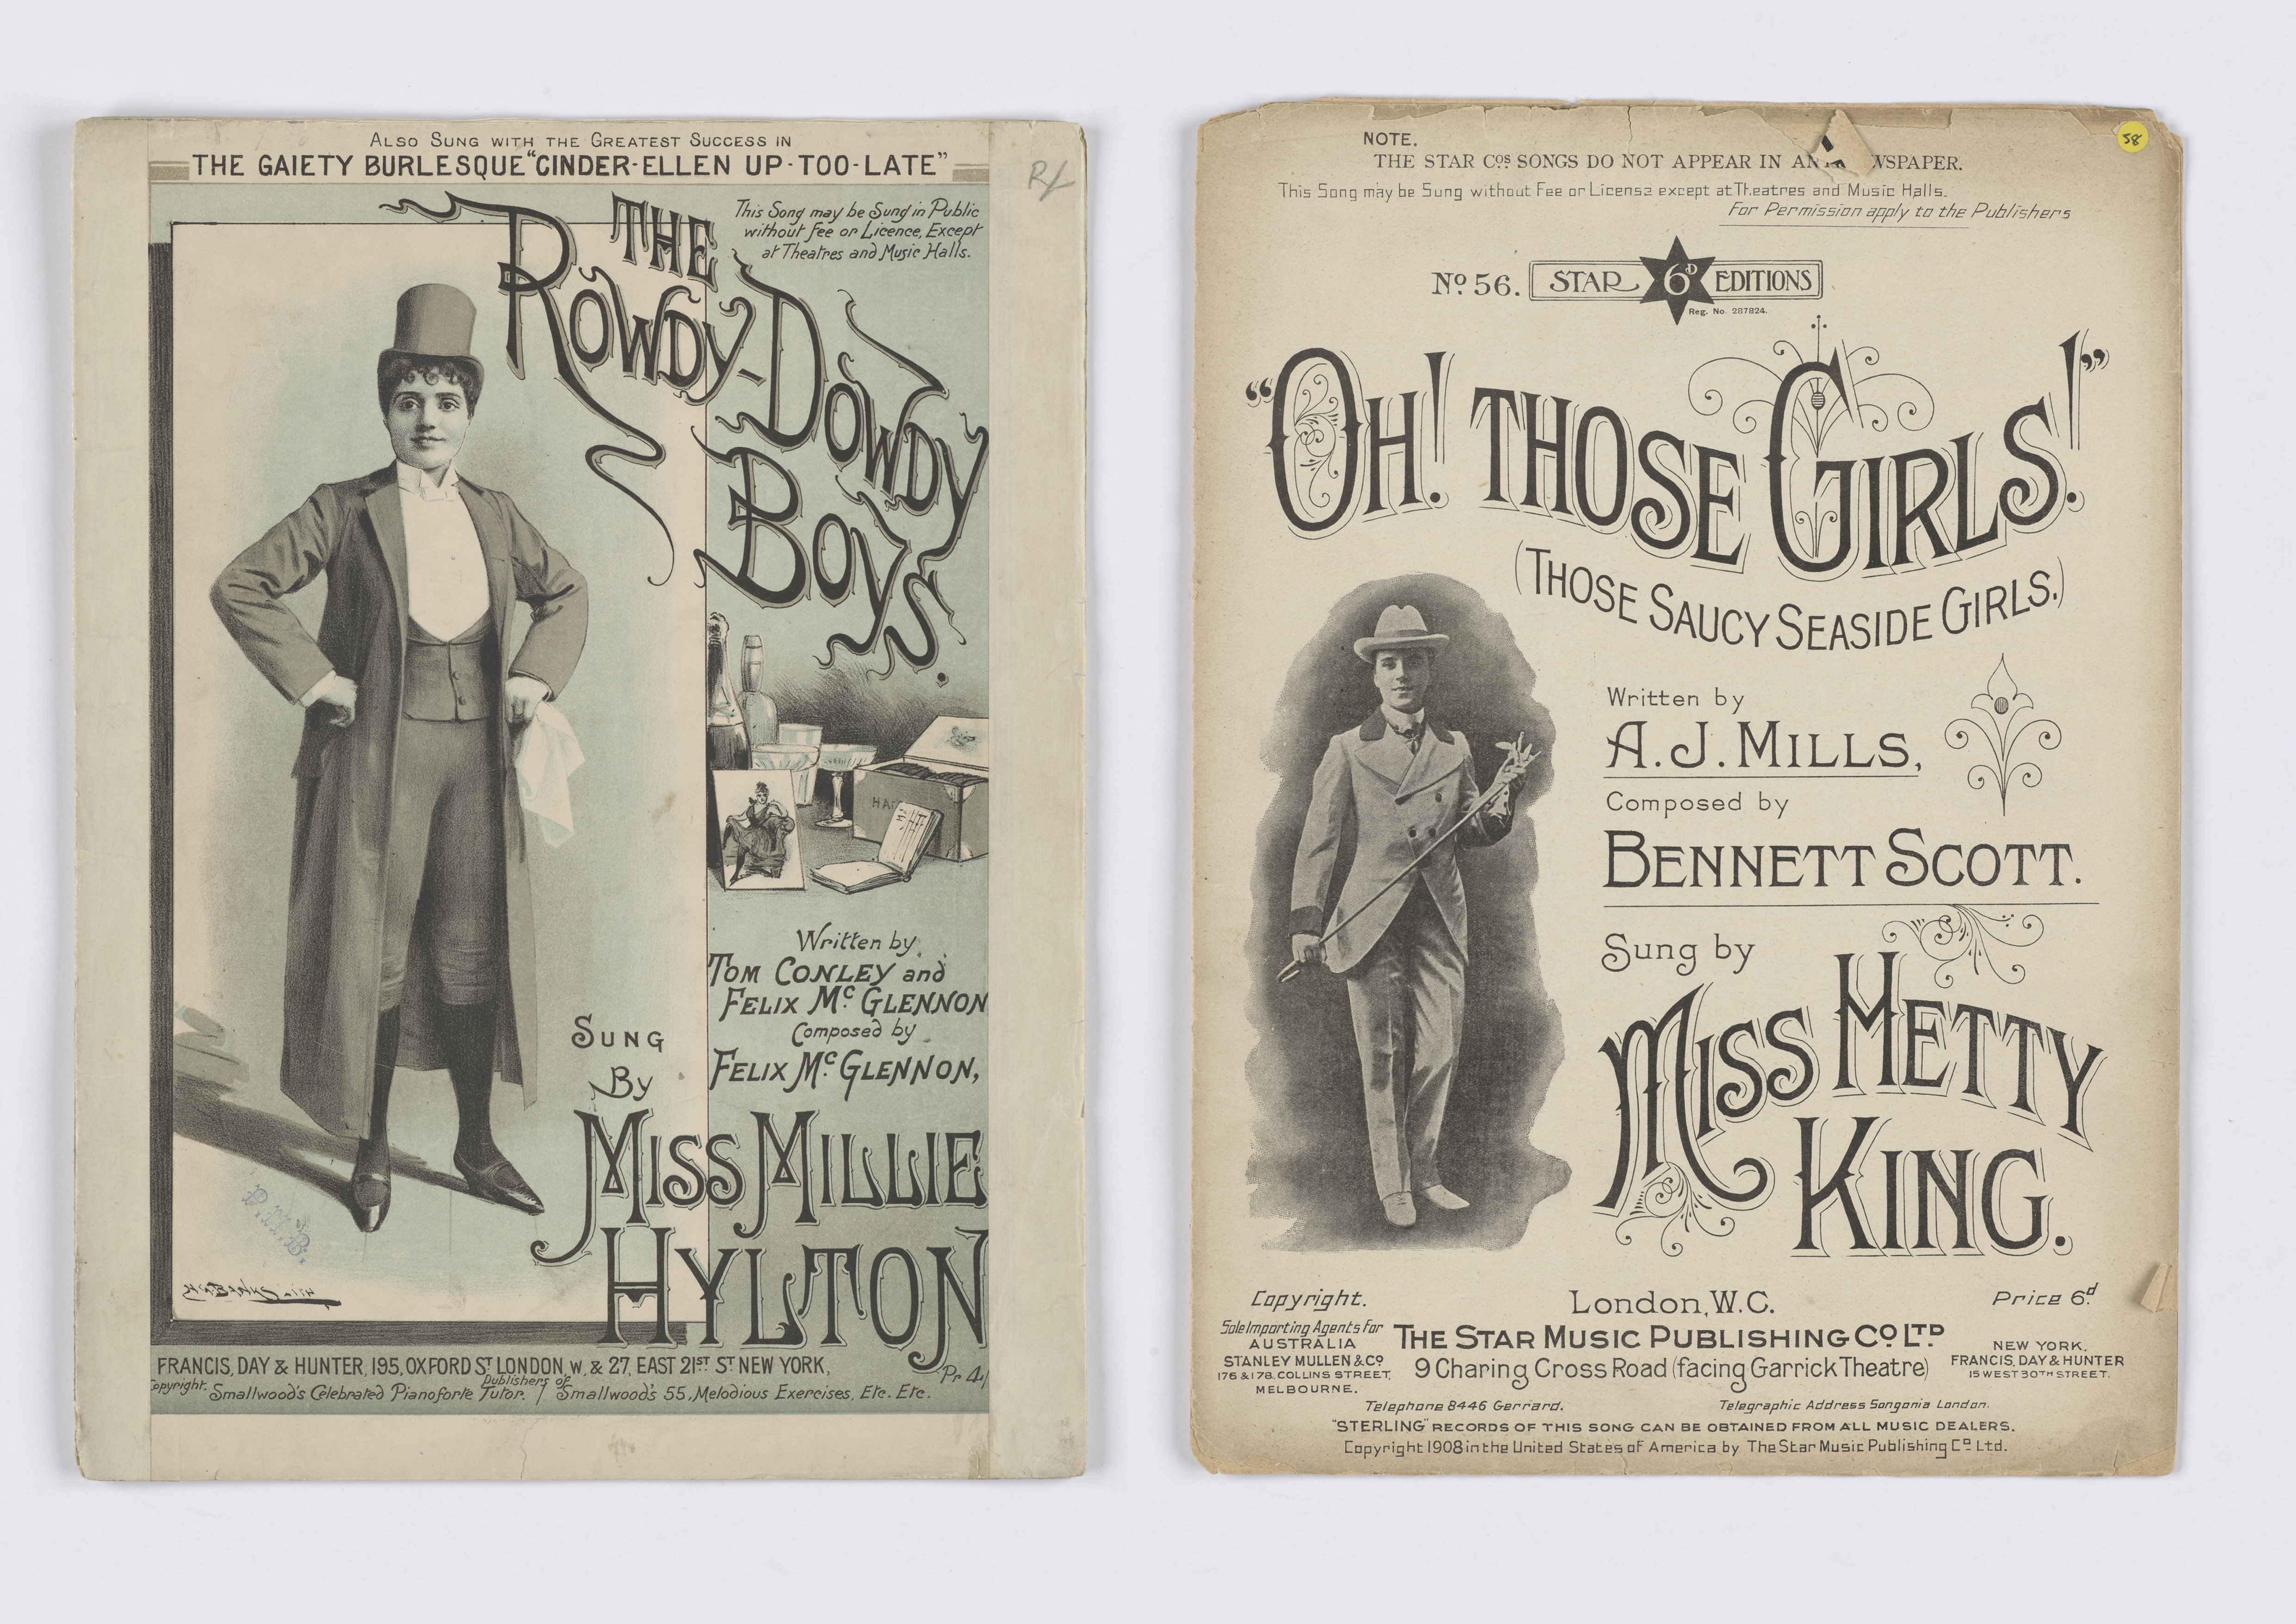 An image of two songsheet covers. On the left is Mille Hylton, 'The rowdy Dowdy Boys'. On the cover stands mille Hylton in a full suit and top hat. On the right is Hetty King's, 'Oh! Those girls! (those saucy seaside girls)'. On the cover we see a photograph of Hetty King, standing wearing a full suit and hat, and holding a walking cane.